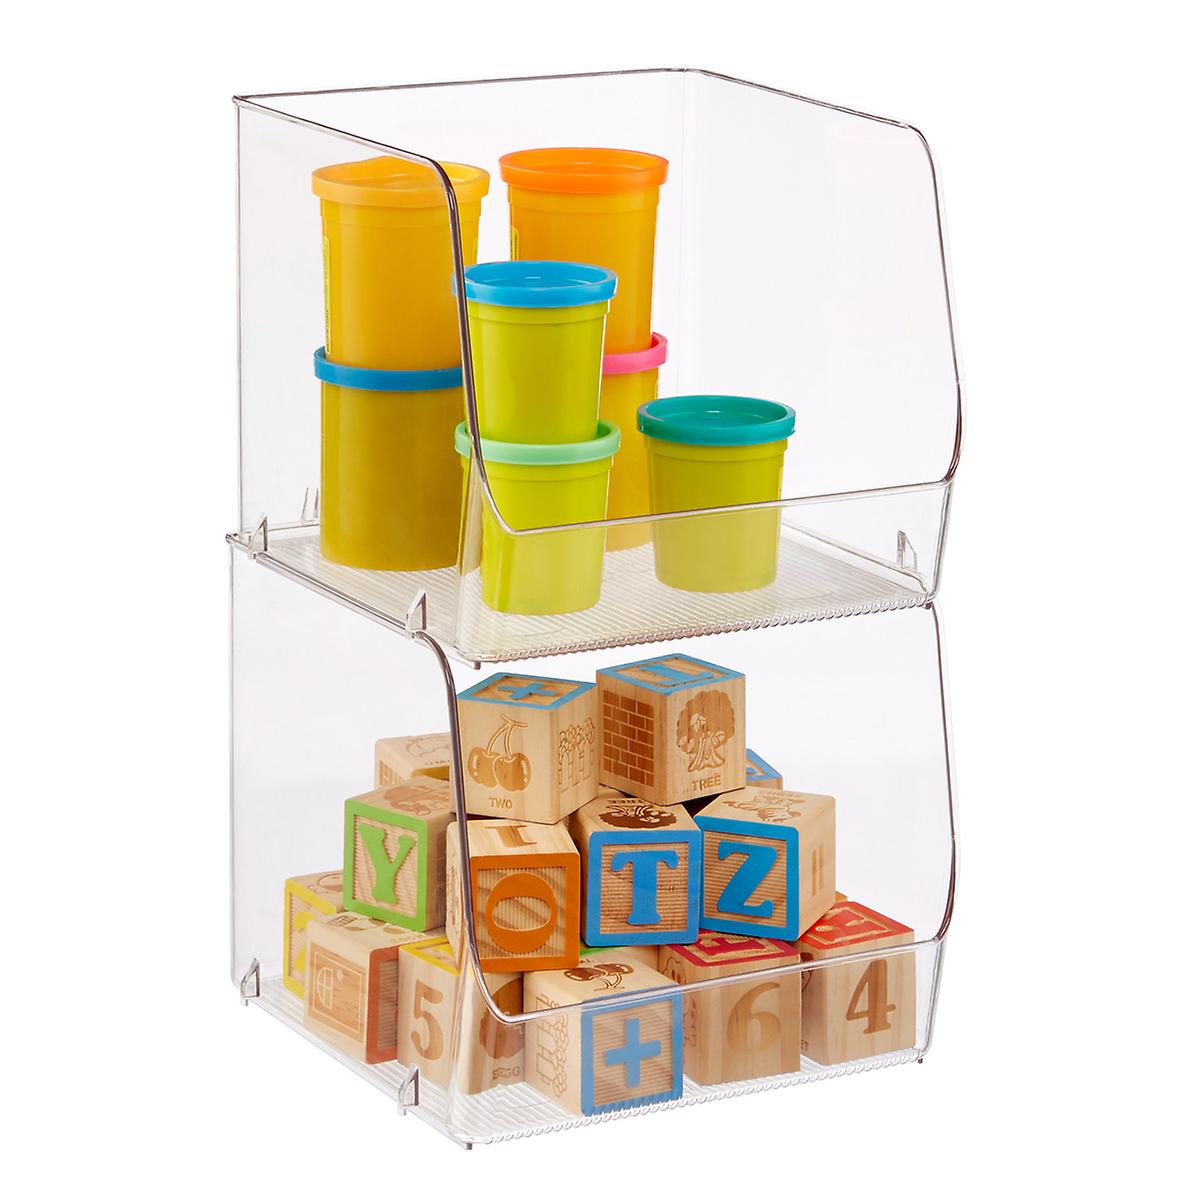 iDesign Linus Open Stackable Bins | The Container Store